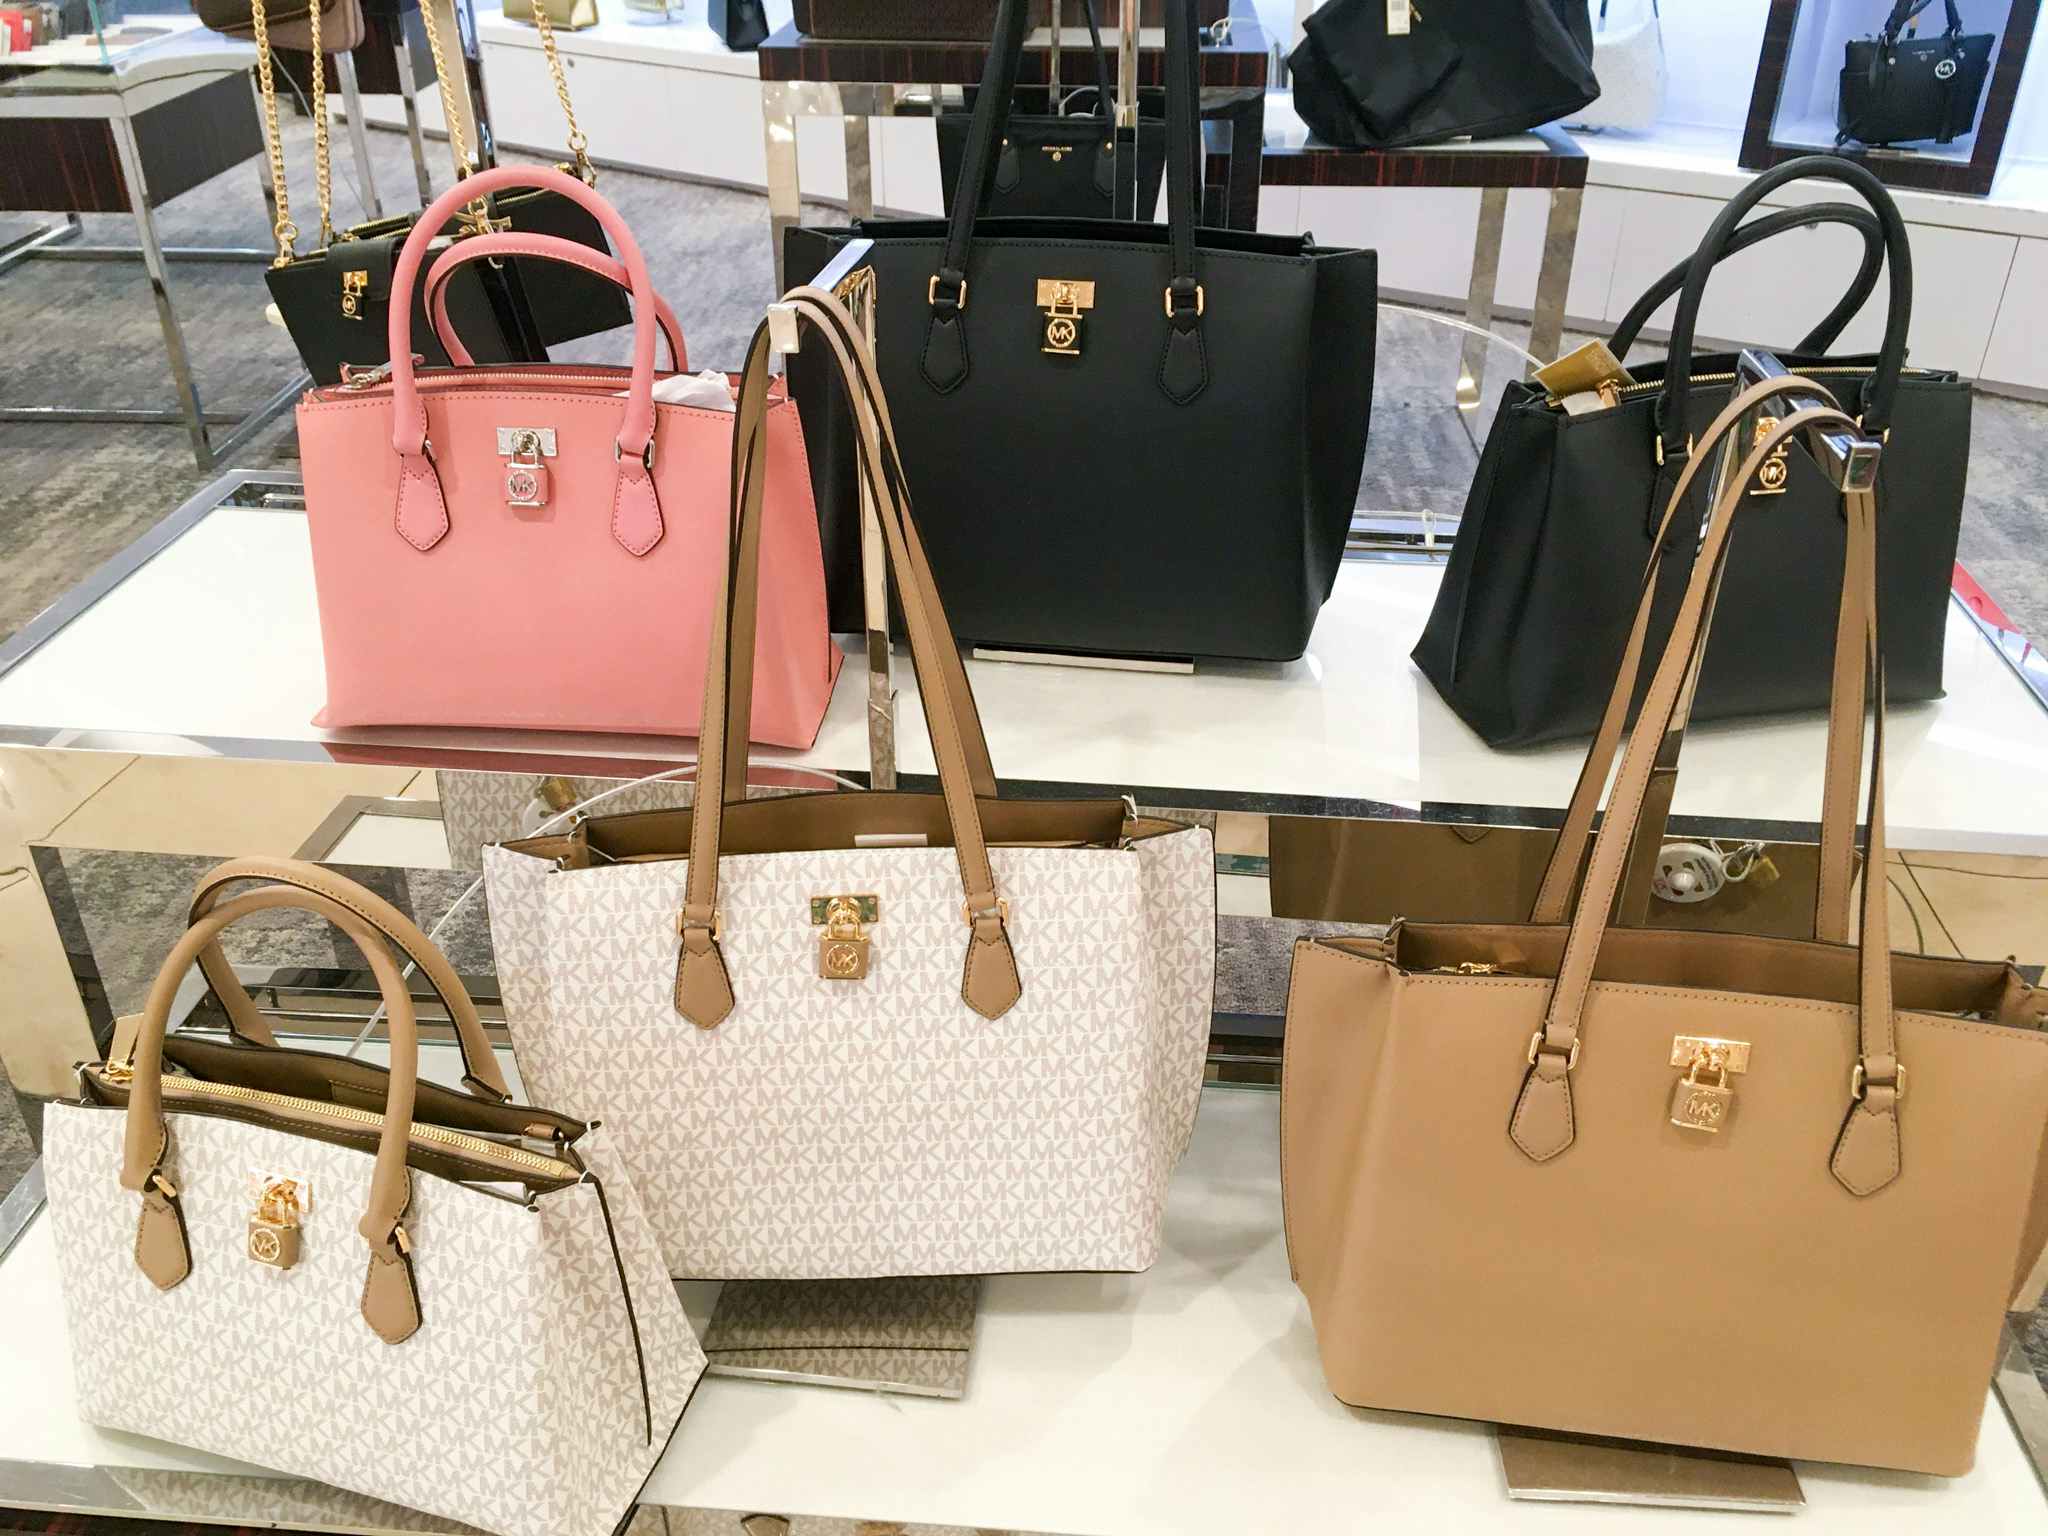 Michael Kors Summer Sale: $69 Leather Crossbody, $89 Satchels, and More